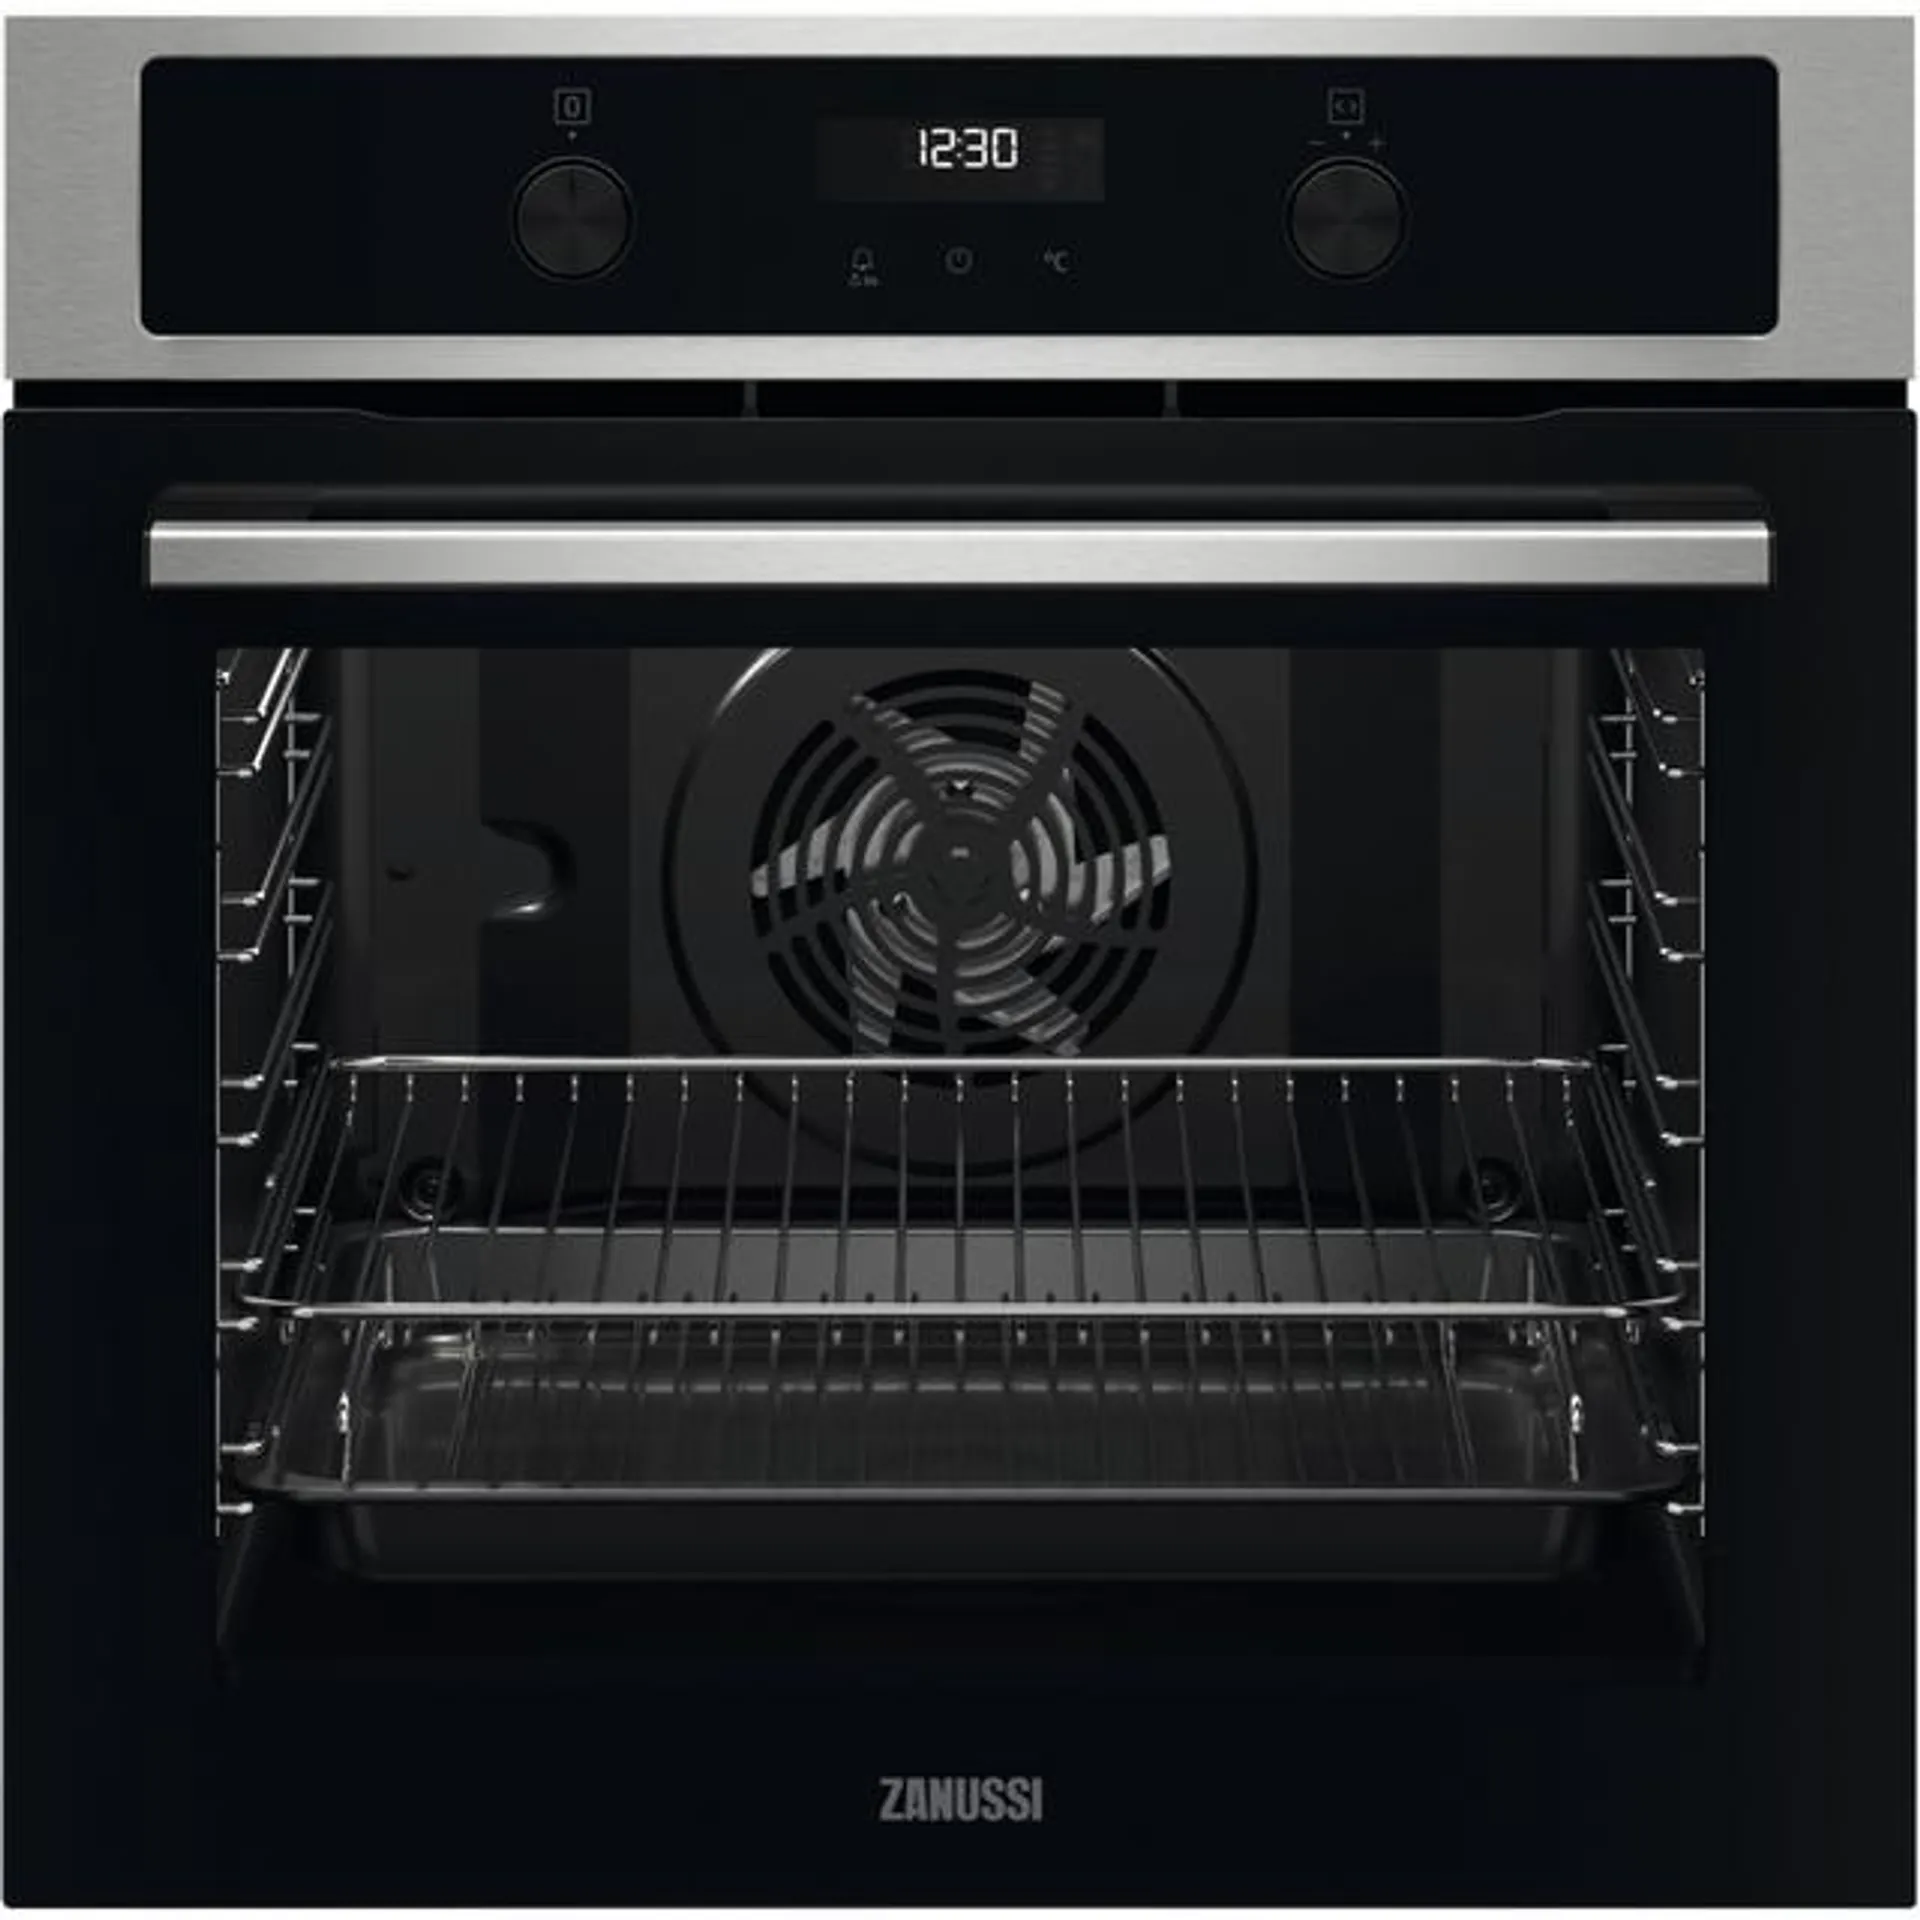 Zanussi ZOPND7X1 Built In Electric Single Oven - Stainless Steel - A+ Rated